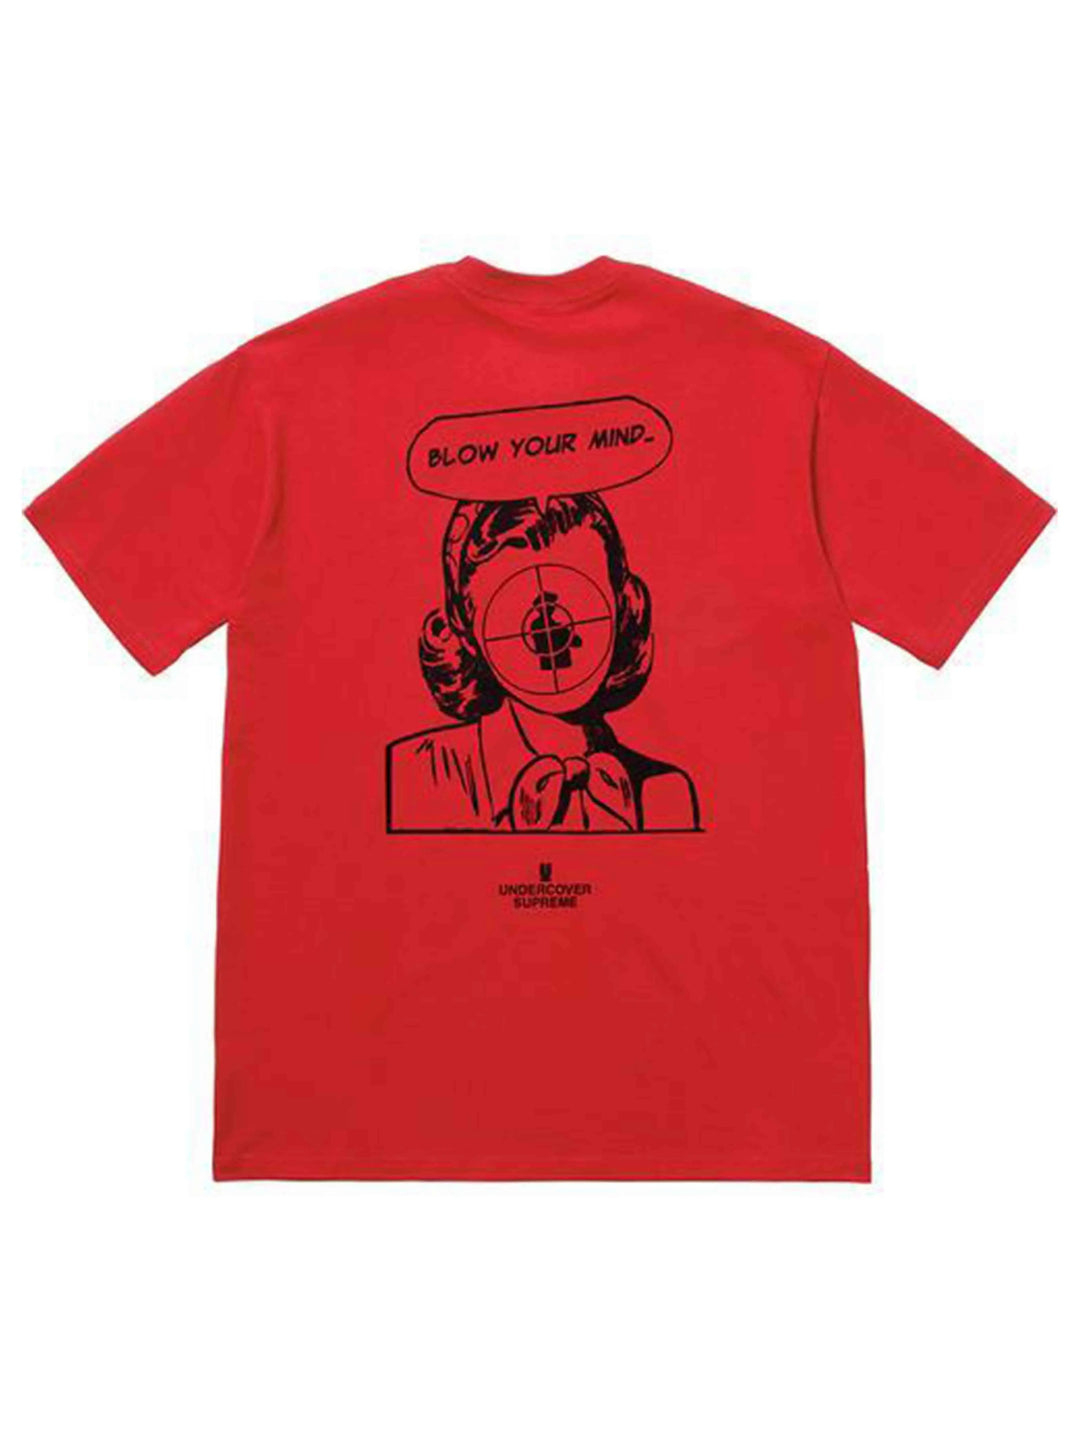 Supreme X UNDERCOVER/Public Enemy Tee Red [SS18] Prior